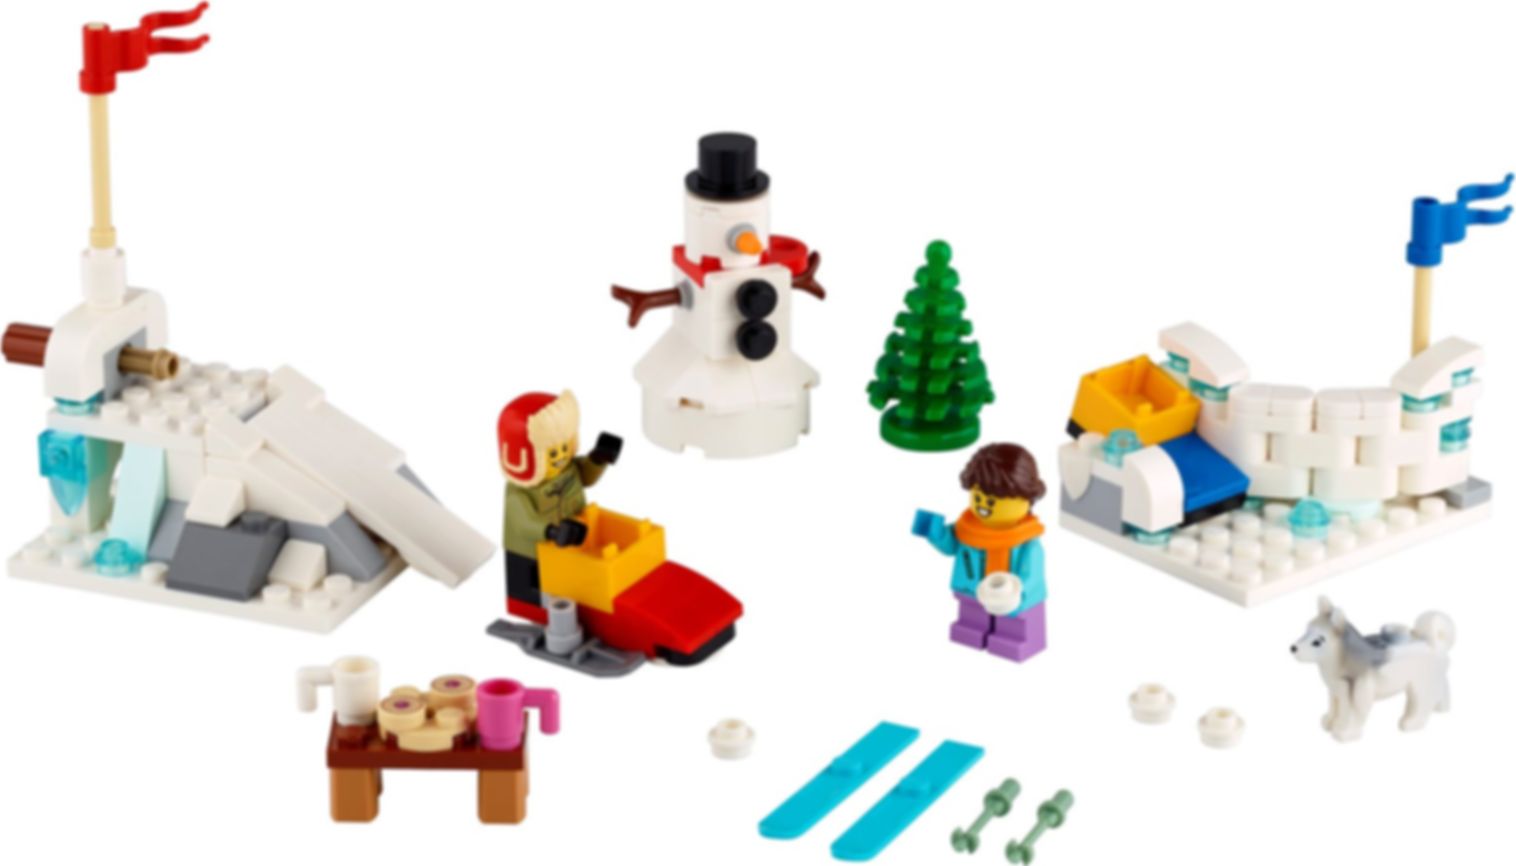 Winter Snowball Fight components